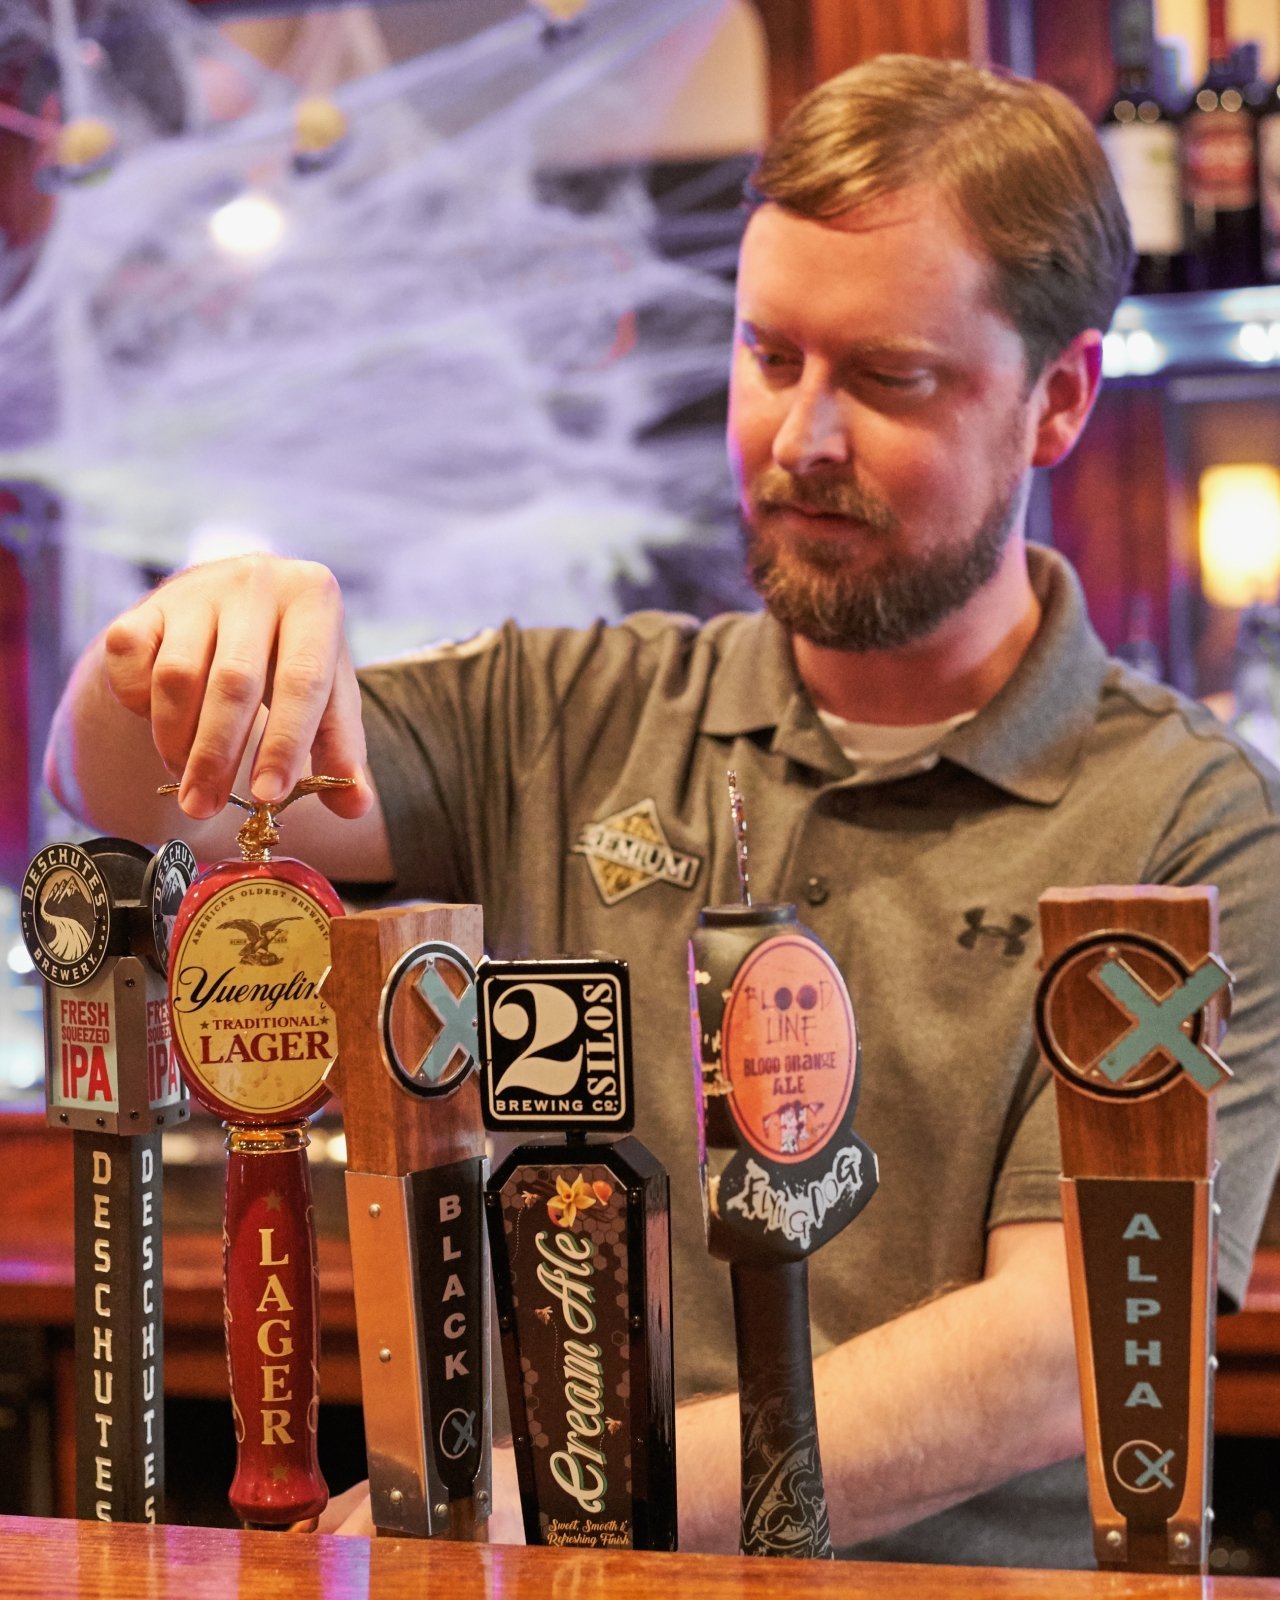 A man in a gray heathered polo type shirt holding the top of a tap handle in a bar setting